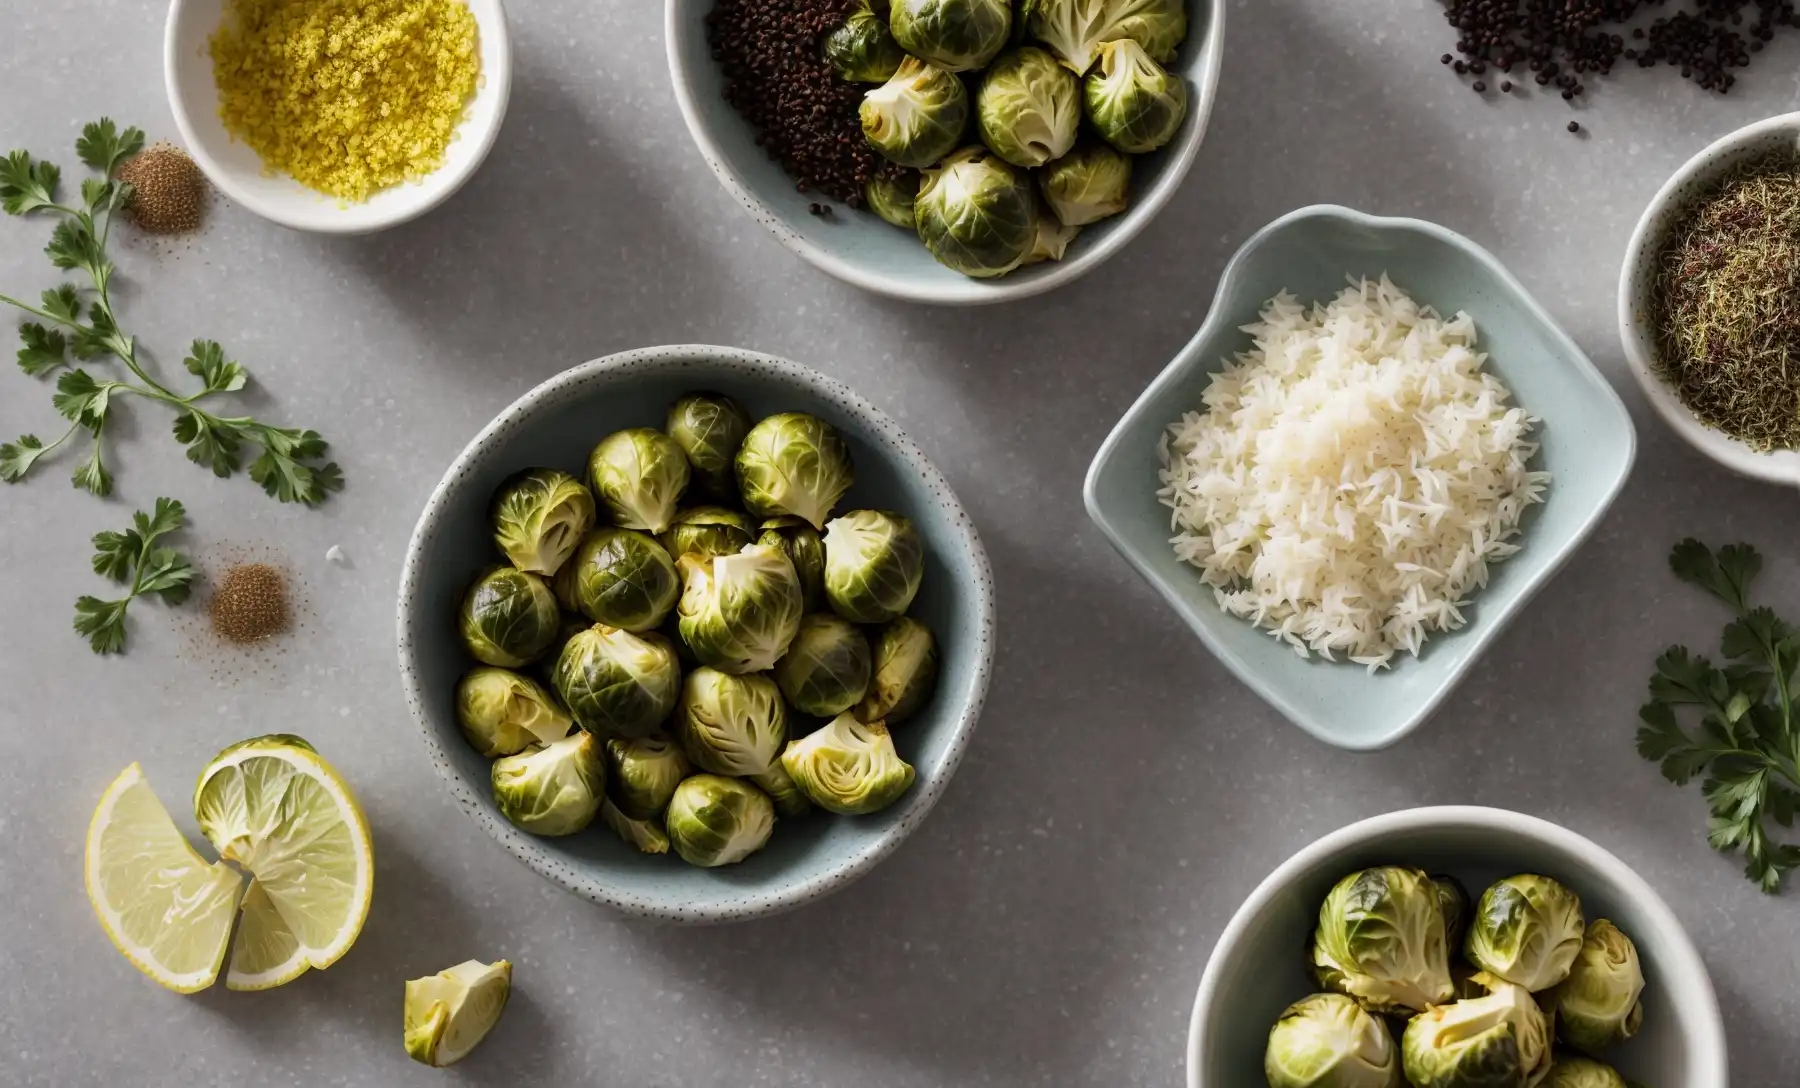 How to Make Brussels Sprouts Not Bitter